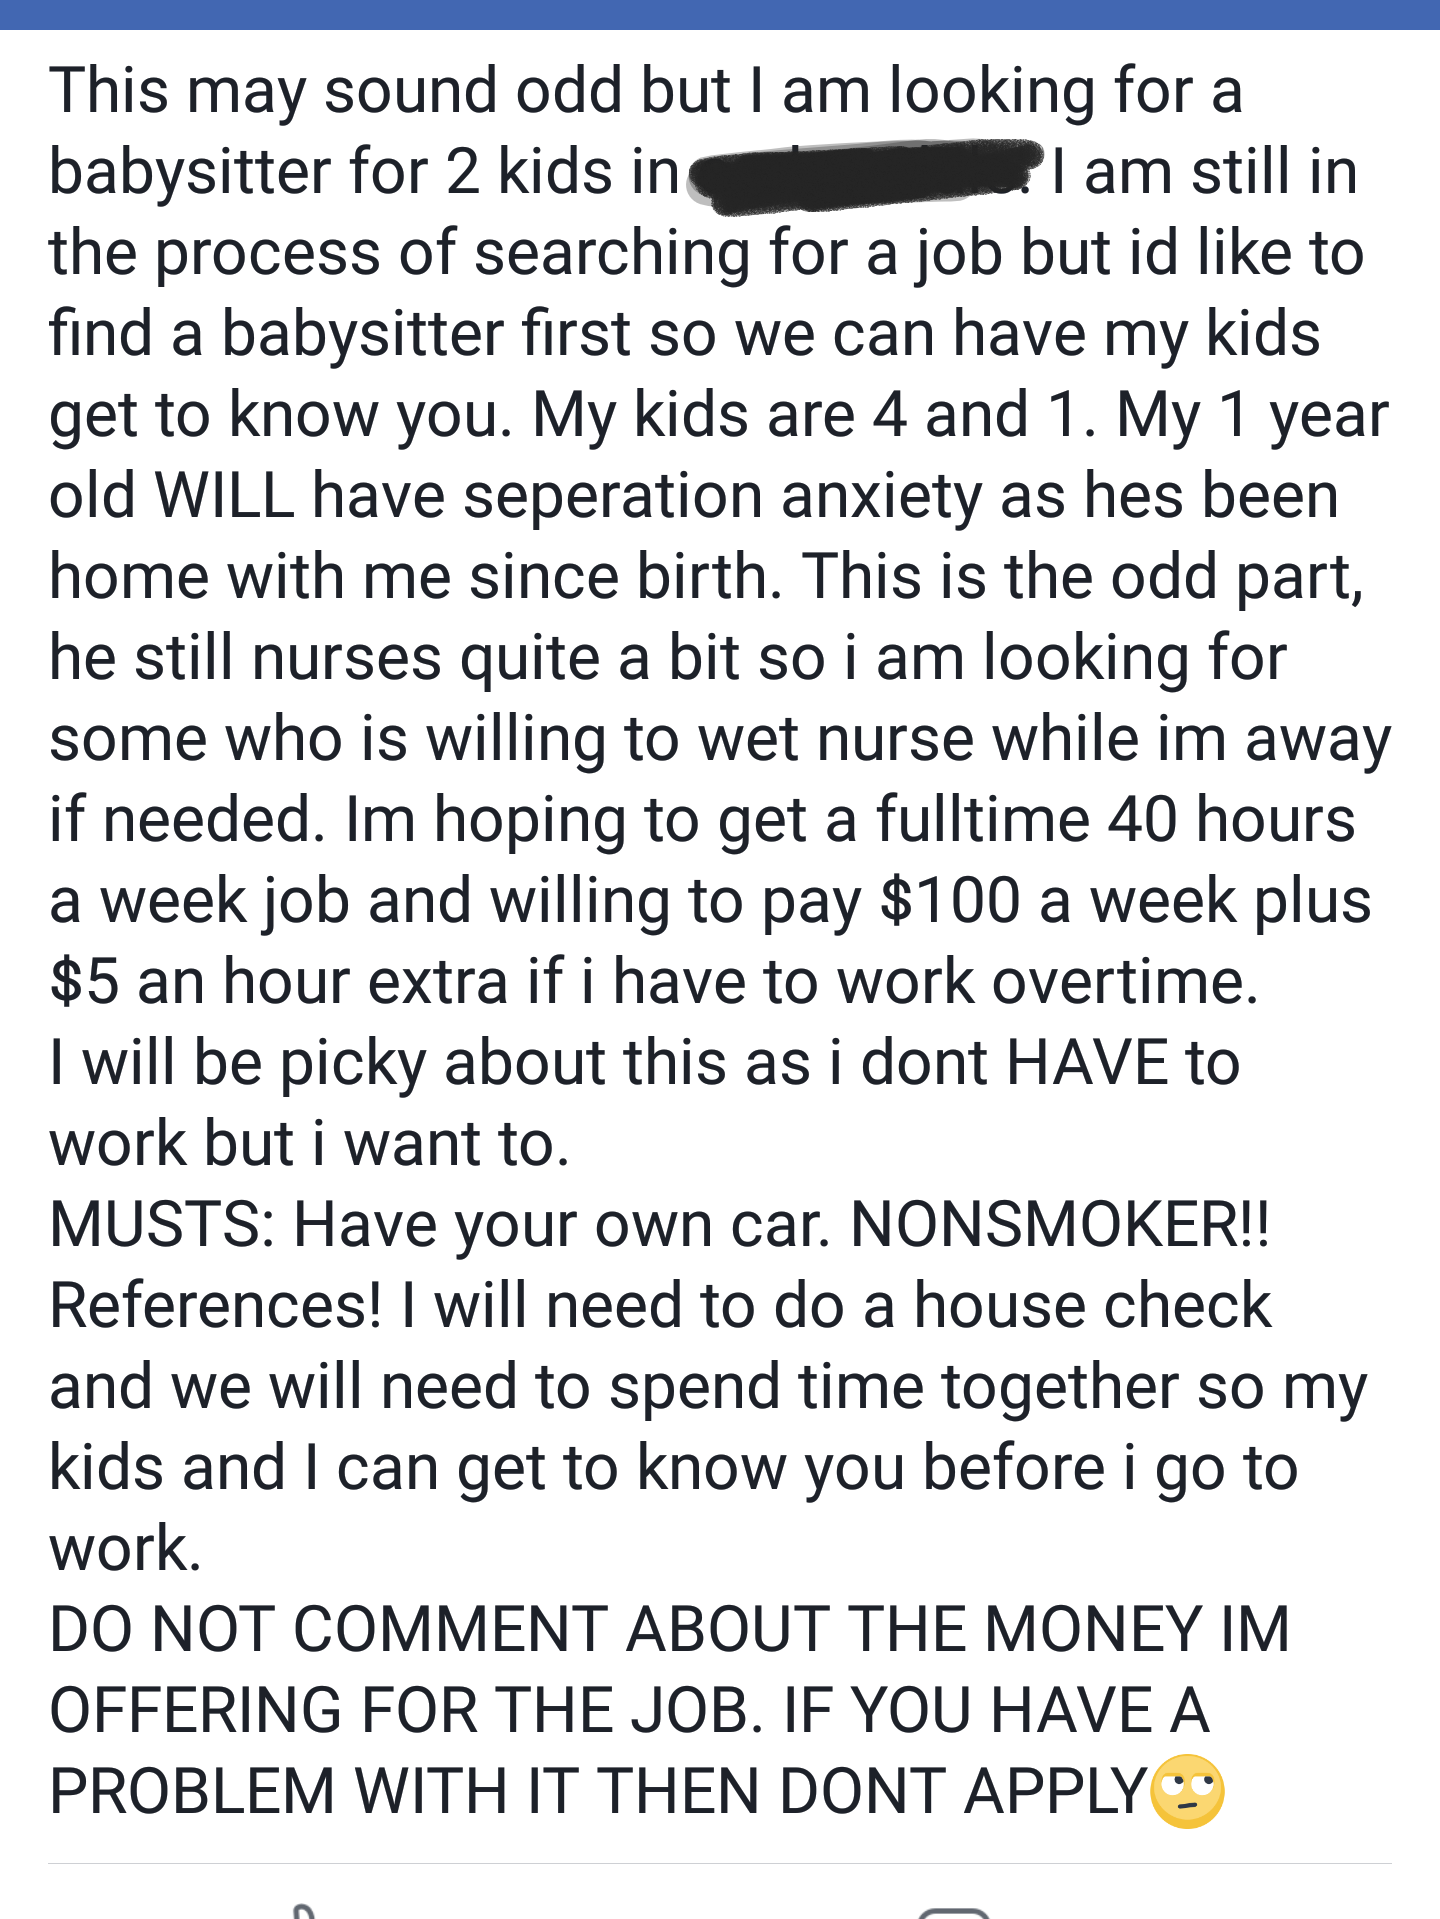 nanny listing asking for a wet nurse and sitter for 40 hours a week at $100 and then saying &quot;don&#x27;t comment about the money I&#x27;m offering, if you have a problem with it then don&#x27;t apply&quot;